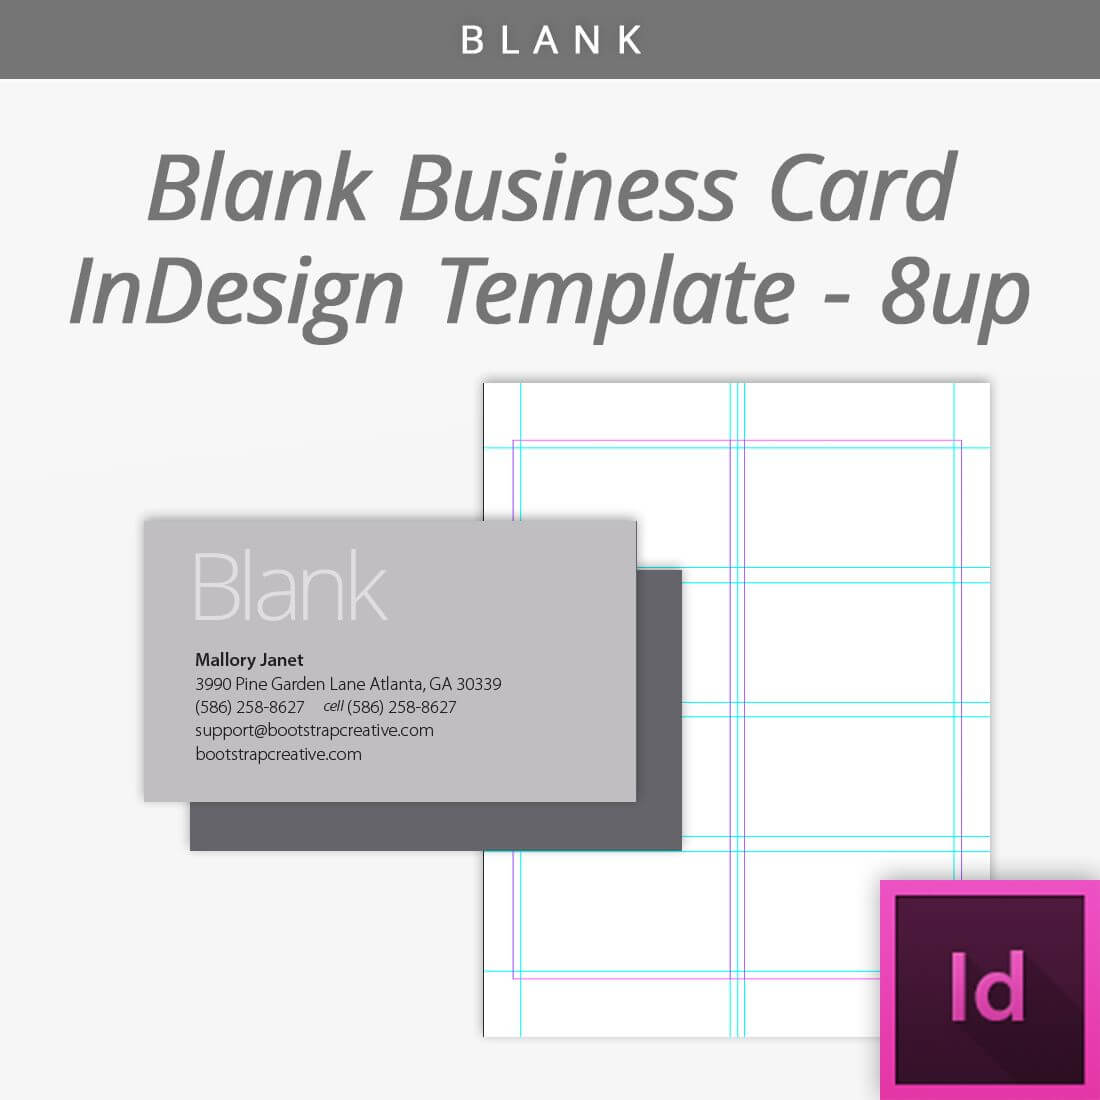 Bootstrap Creative | Blank Business Cards, Free Business Inside Birthday Card Template Indesign